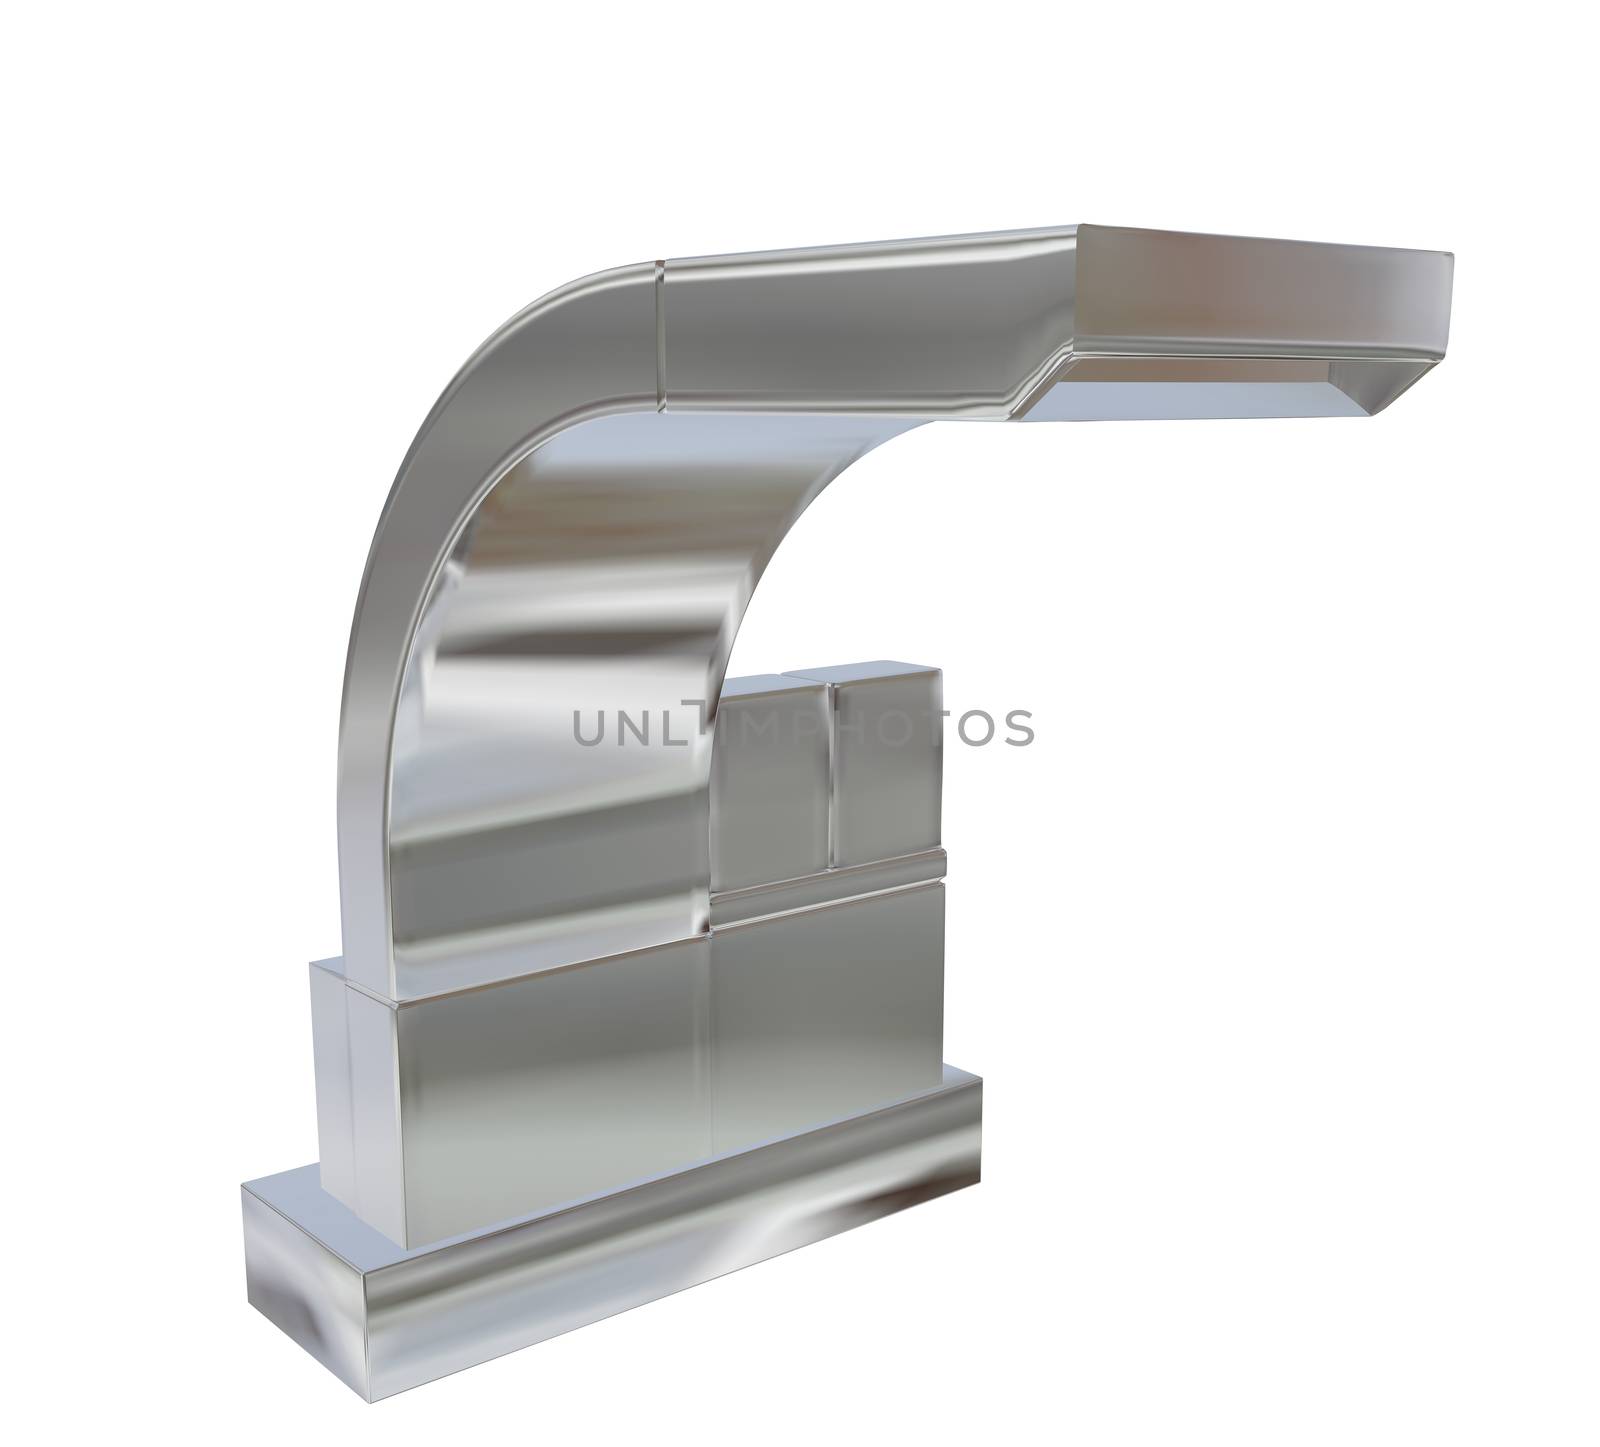 Modern square faucet with chrome or stainless steel finishing, 3d illustration, isolated against a white background. Kitchen fixtures.